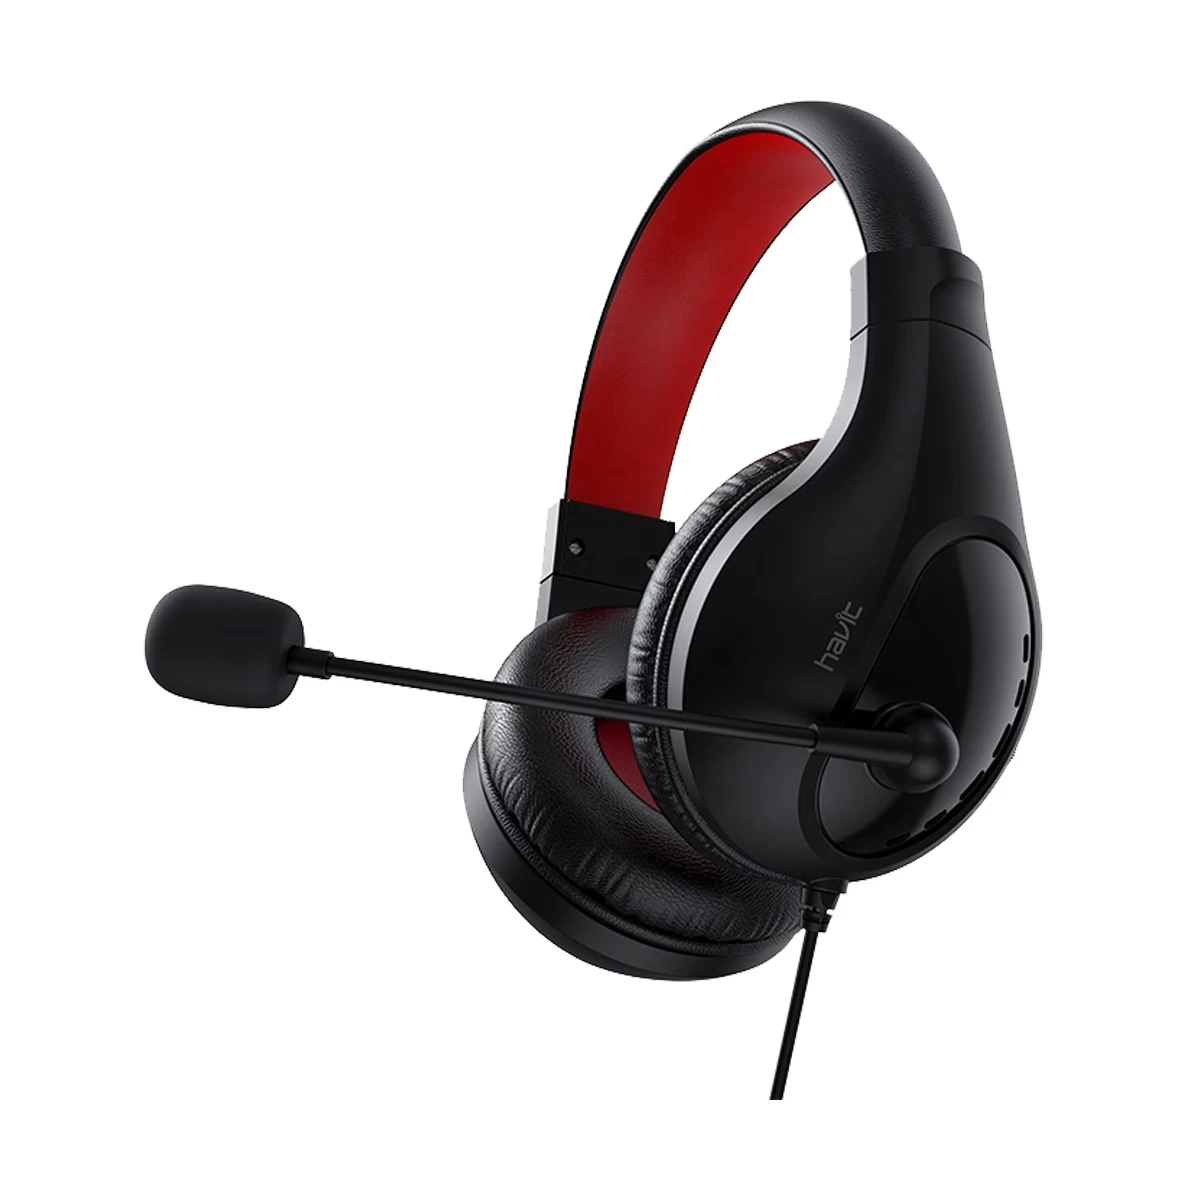 Havit H2116D Wired Black-Red Headphone with Microphone